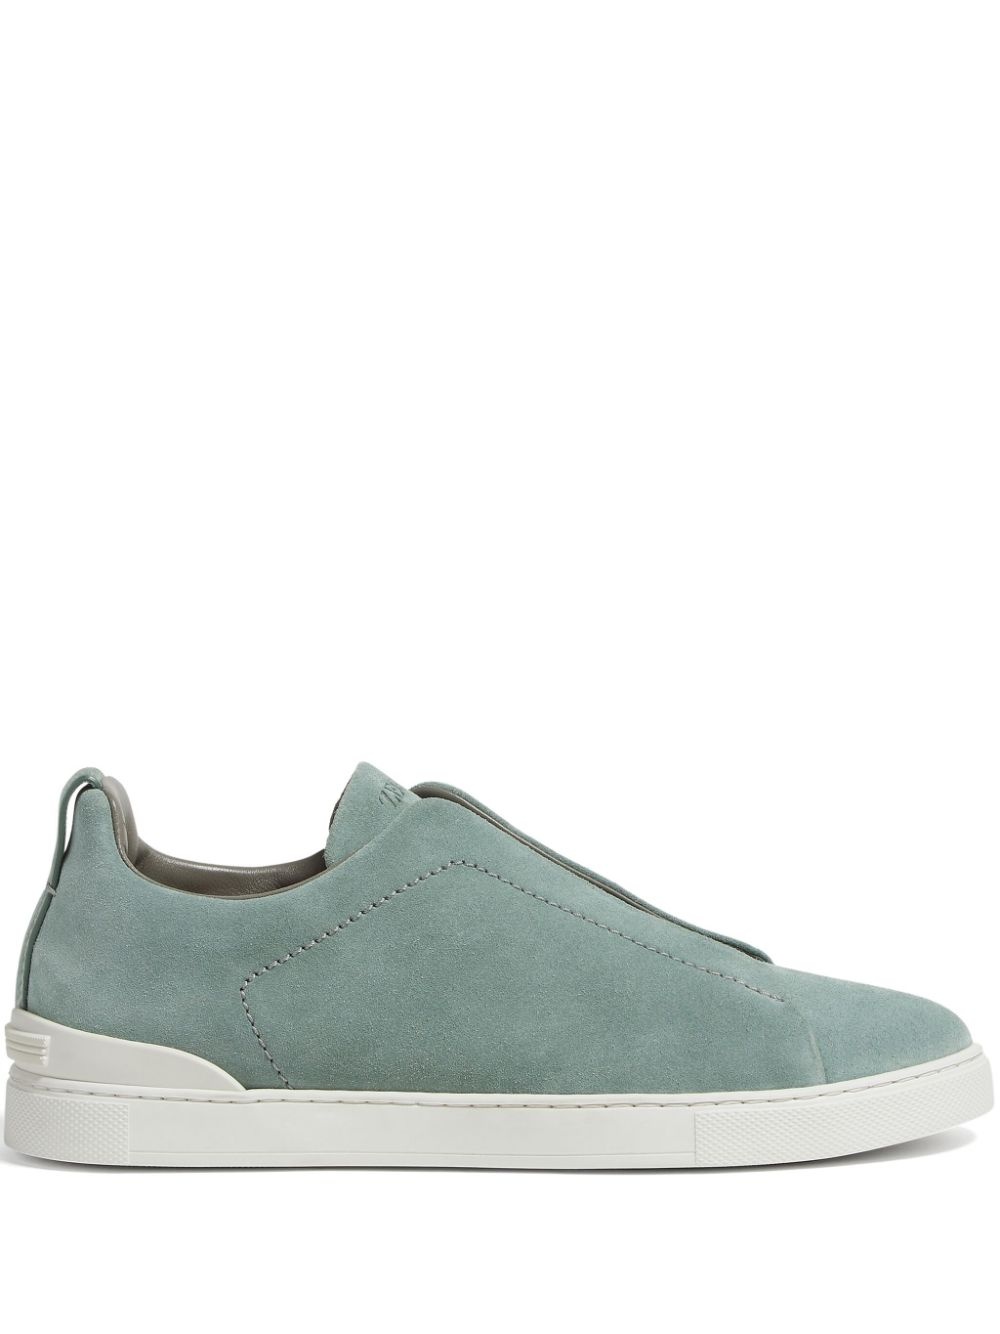 Triple Stitch suede sneakers - 1